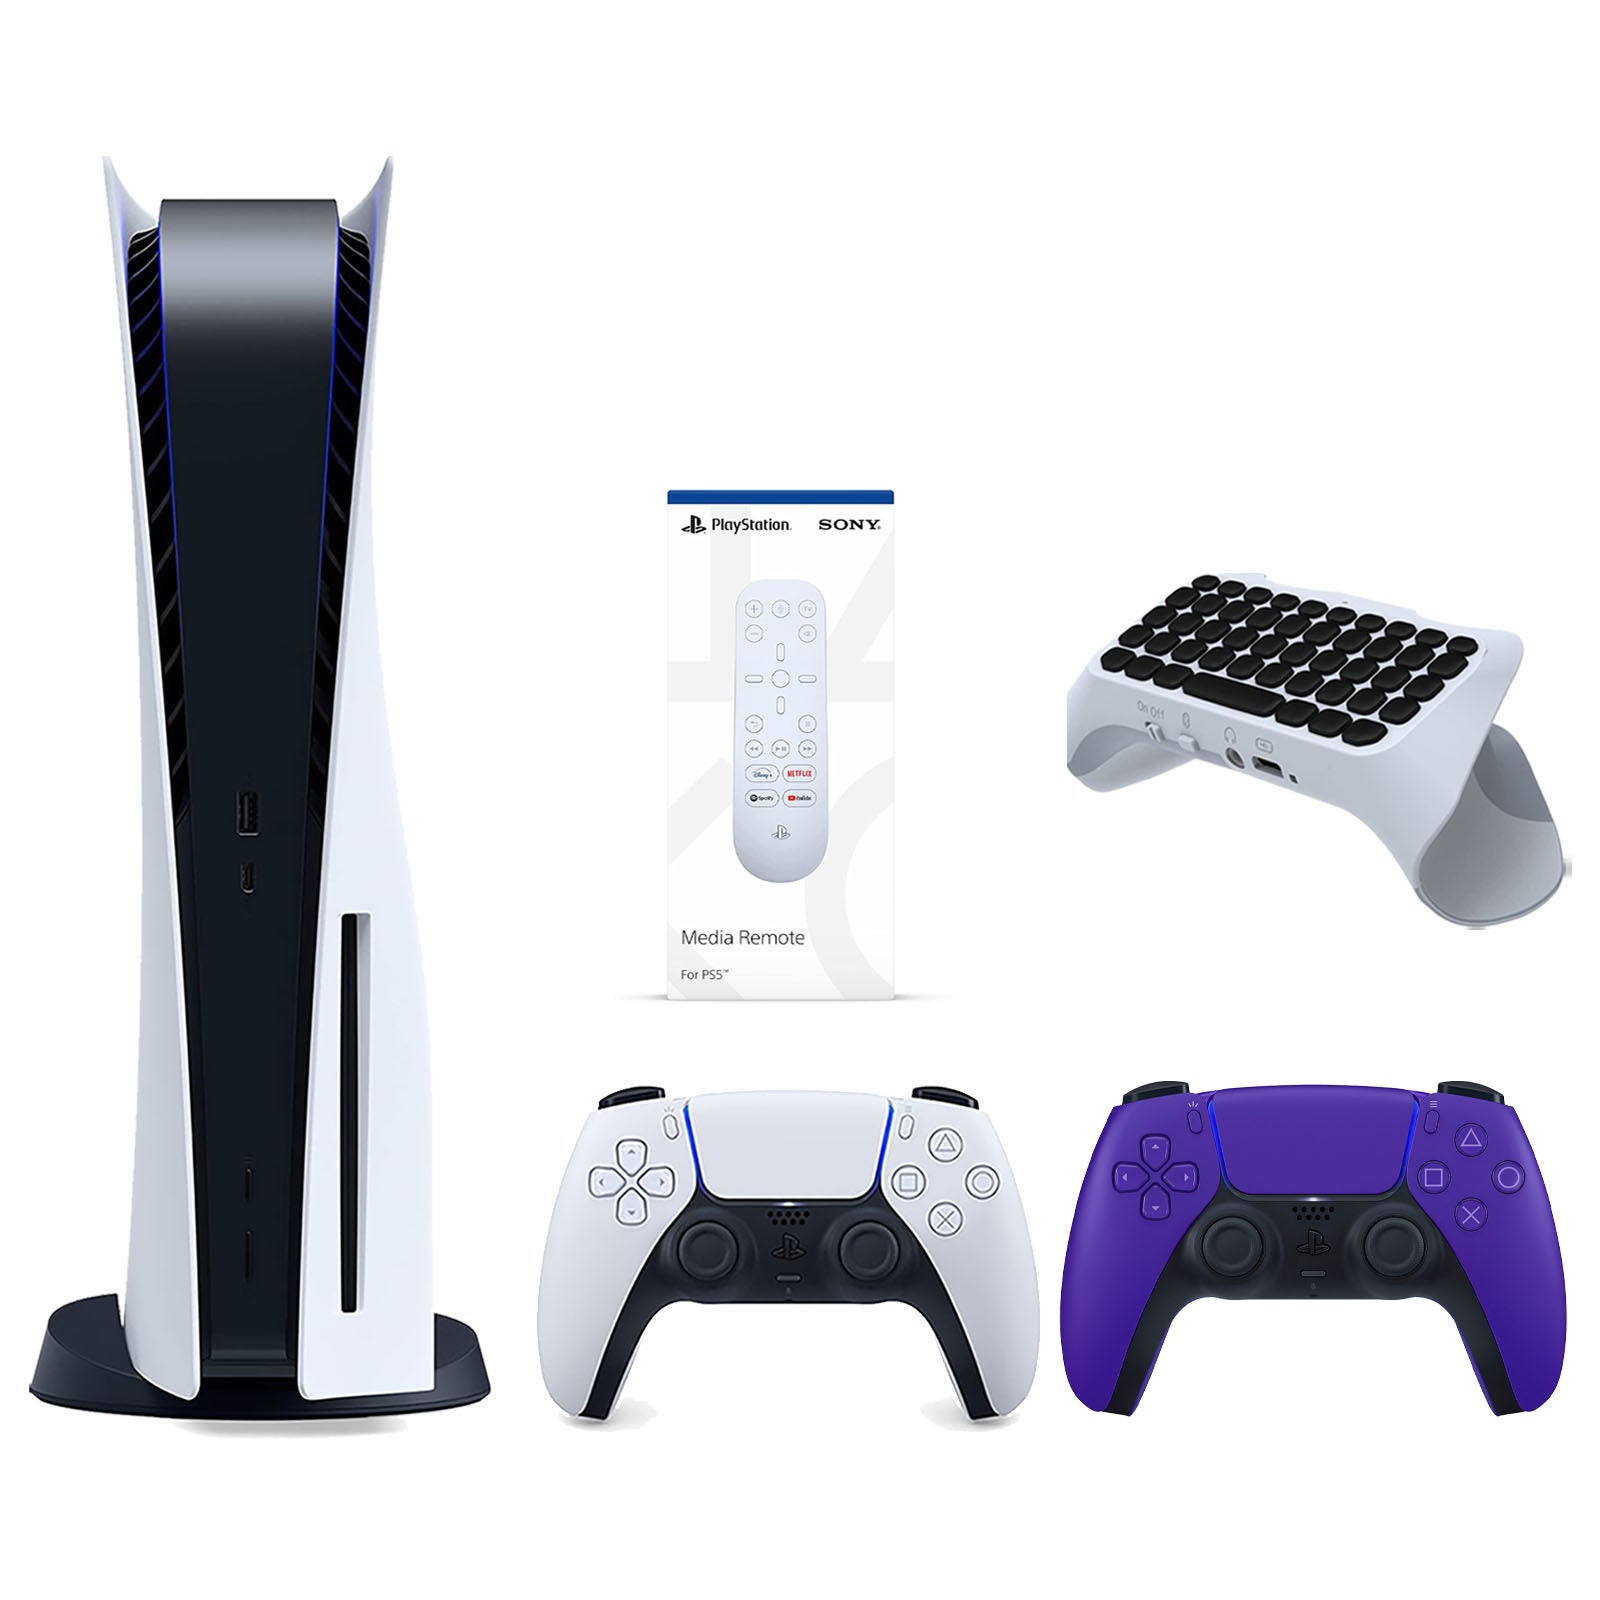 Sony Playstation 5 Disc Version Console with Extra Purple Controller, Media Remote and Surge QuickType 2.0 Wireless PS5 Controller Keypad Bundle - Pro-Distributing